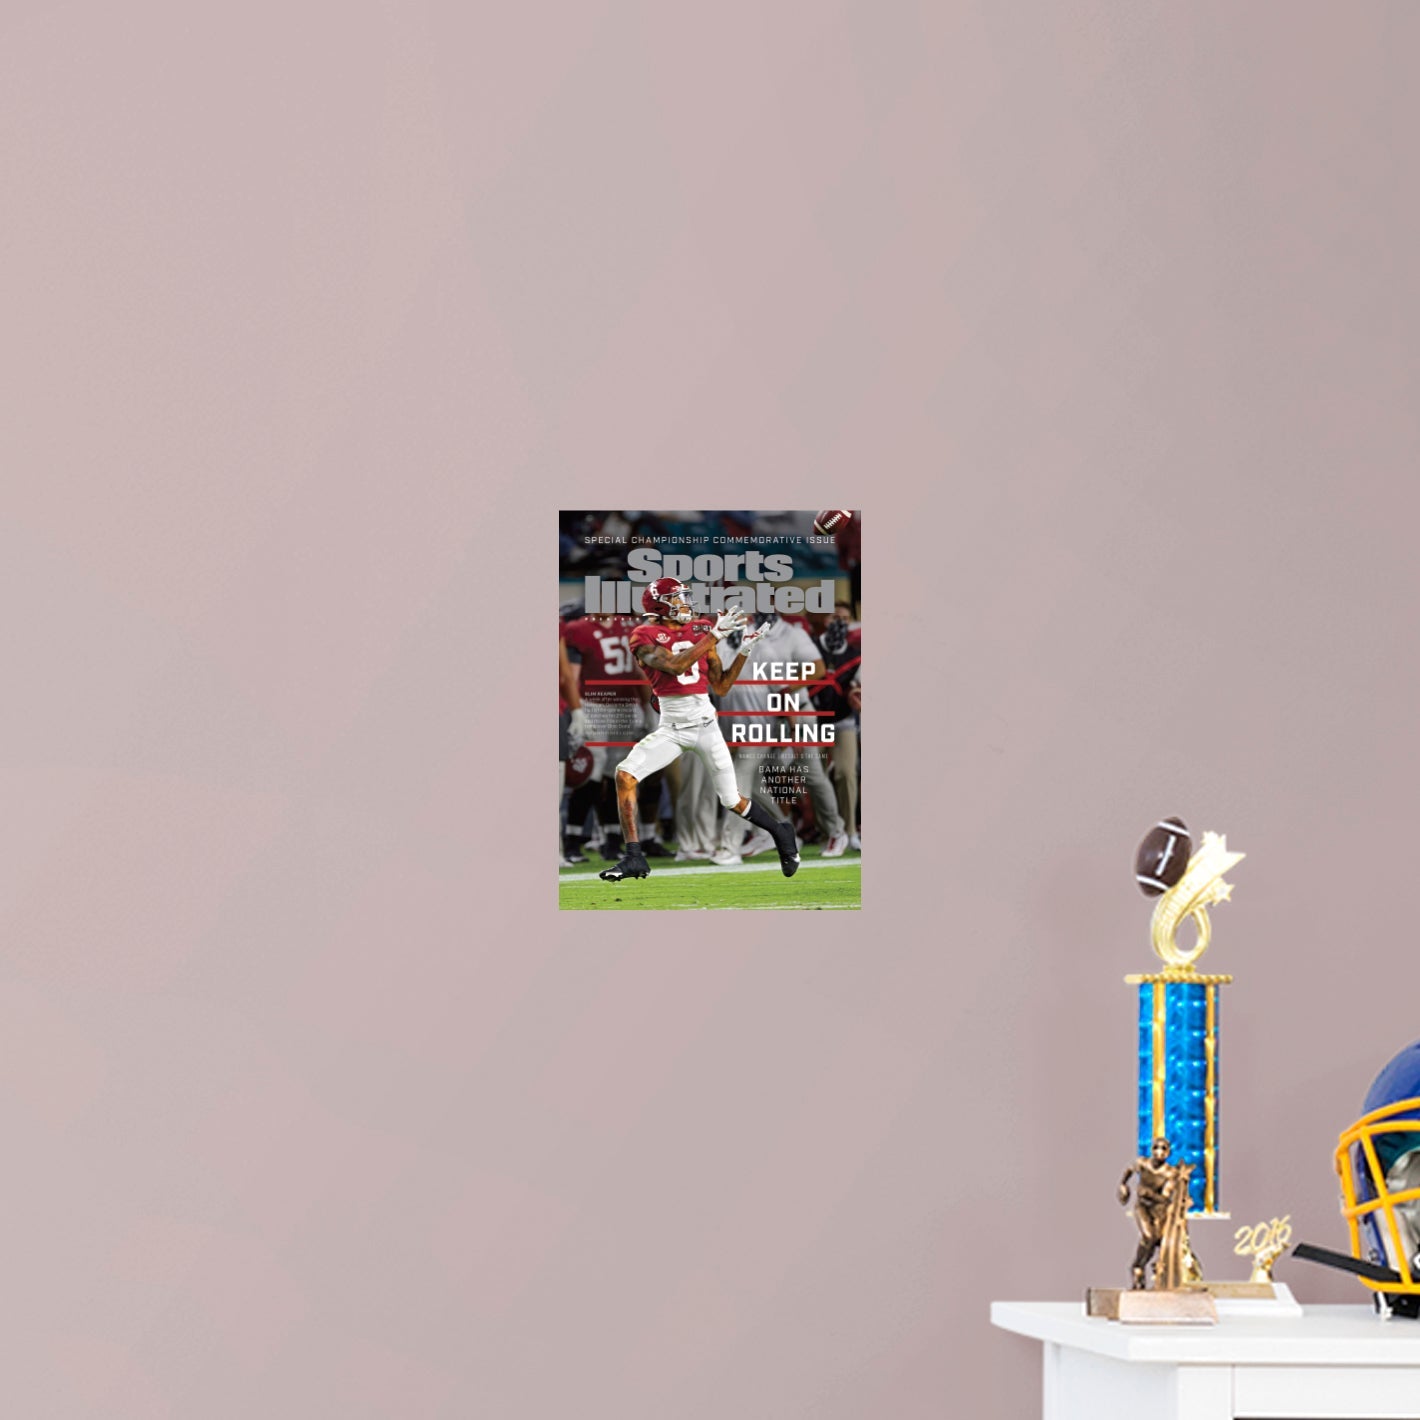 Alabama Crimson Tide: DeVonta Smith January 2021 Championship Commemorative Sports Illustrated Cover - Officially Licensed NCAA Removable Adhesive Decal